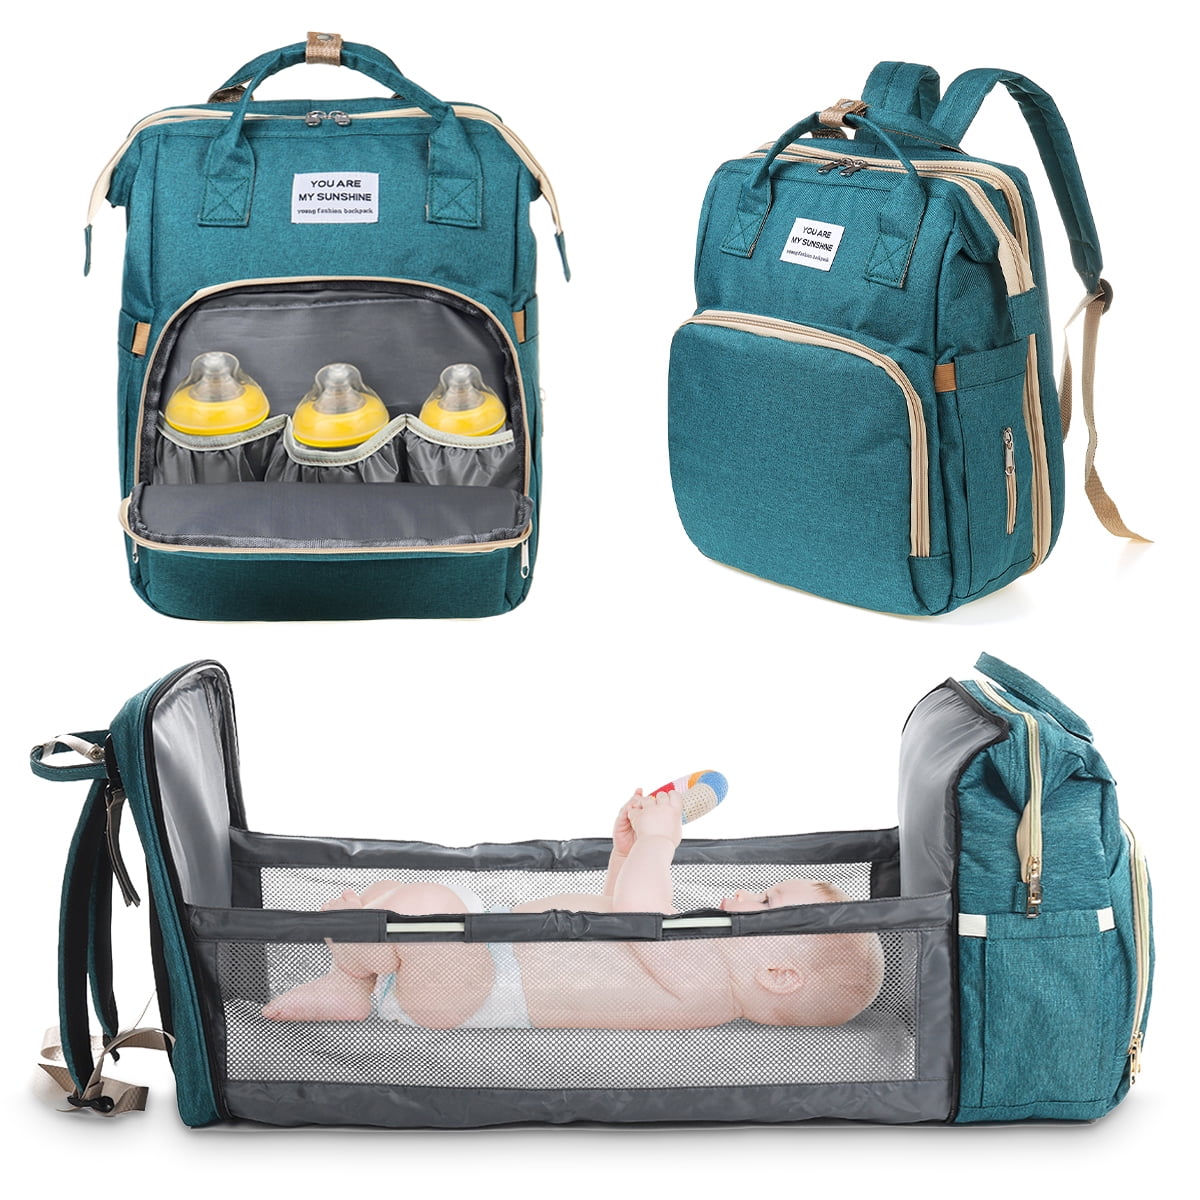 The Stylish Baby Bag for Mum & Dad A Baby Changing Bag Backpack by Mushy Mushy 